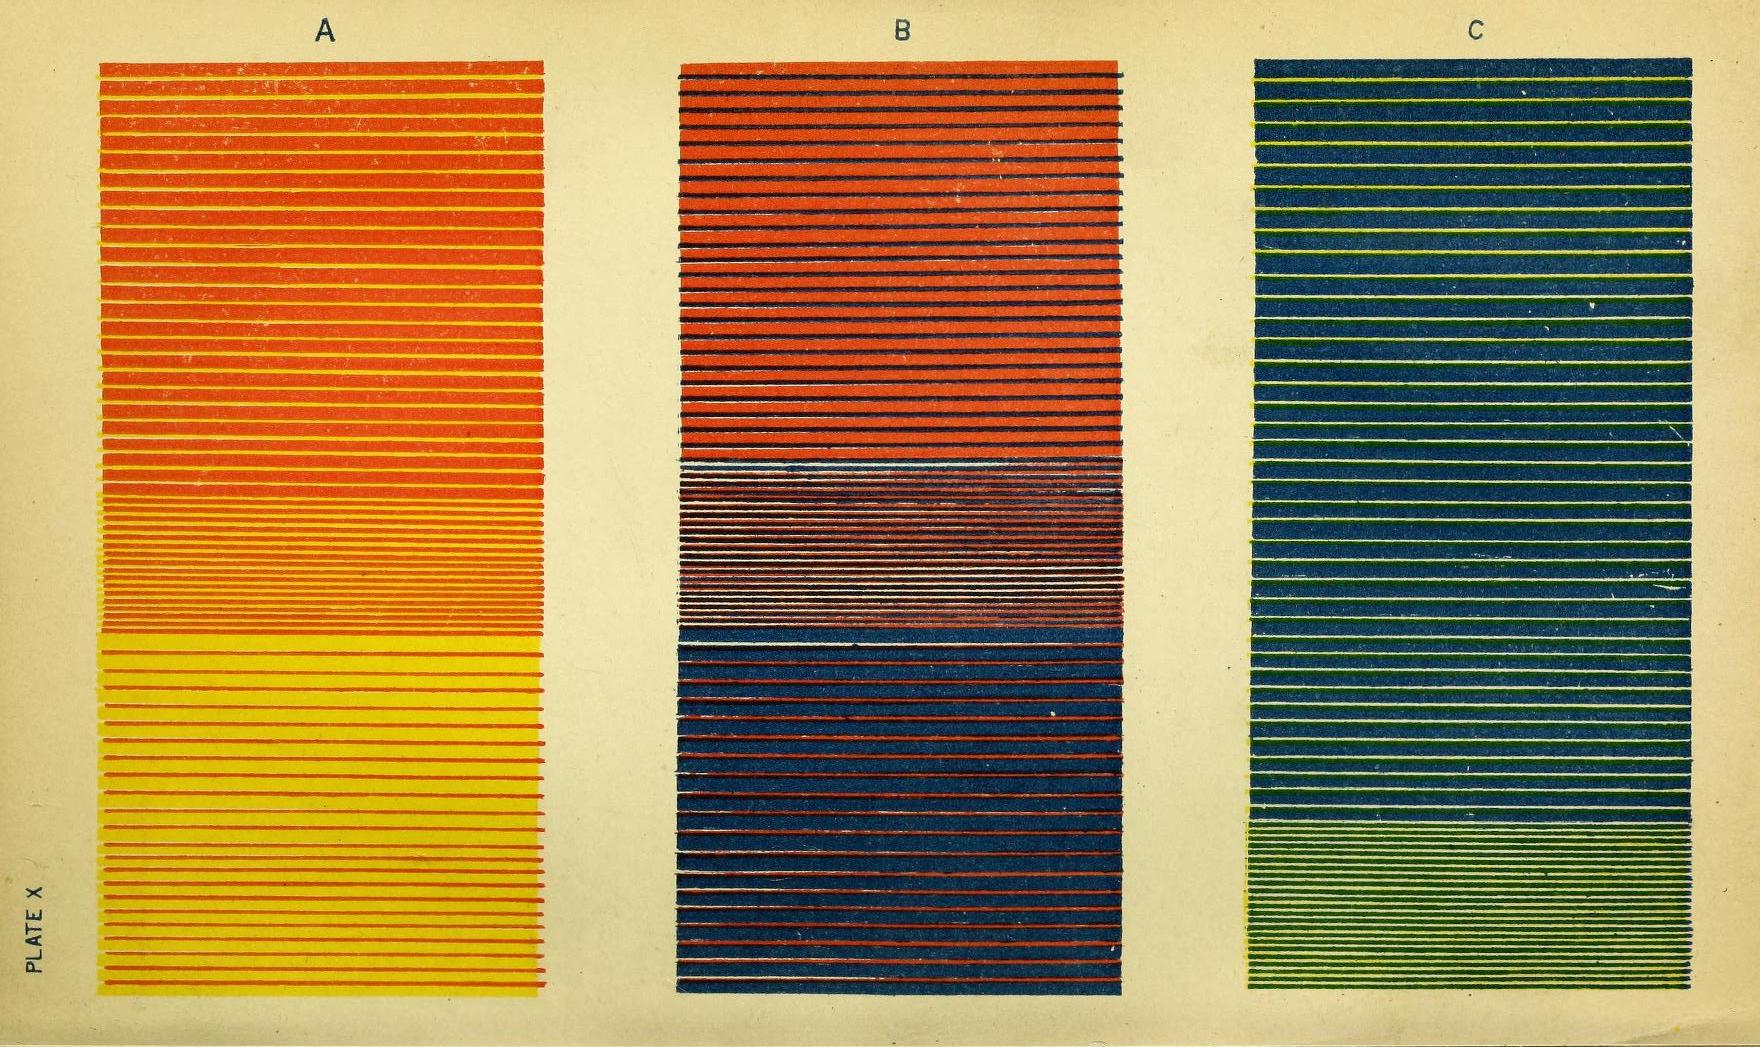 Three color study panels of orange, yellow, blue and green.